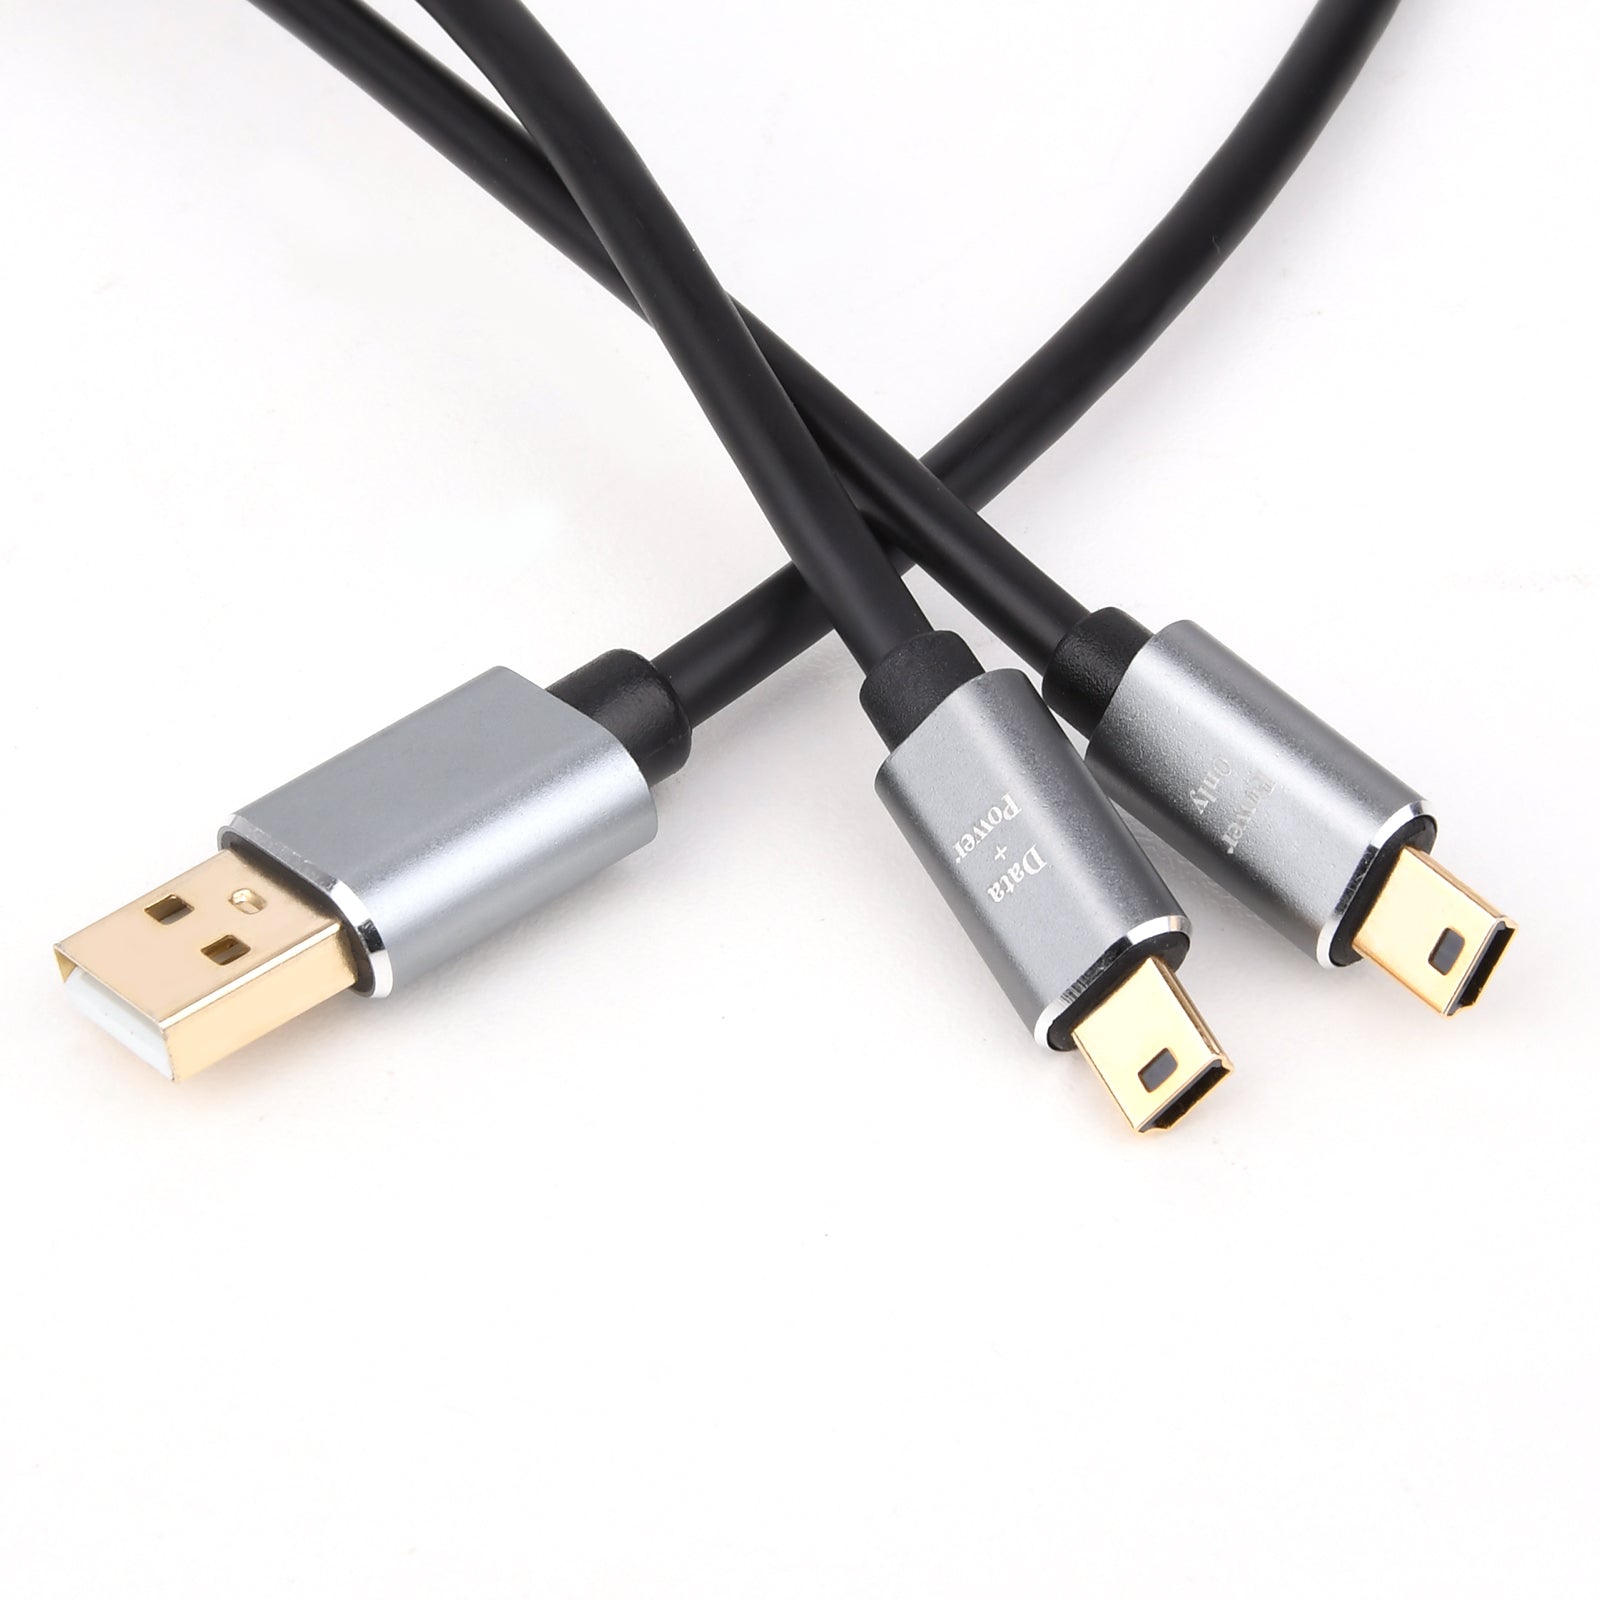 USB 2.0 A Male to Dual Mini B 5-pin Male Data Sync Charge Y Splitter Cable 1m